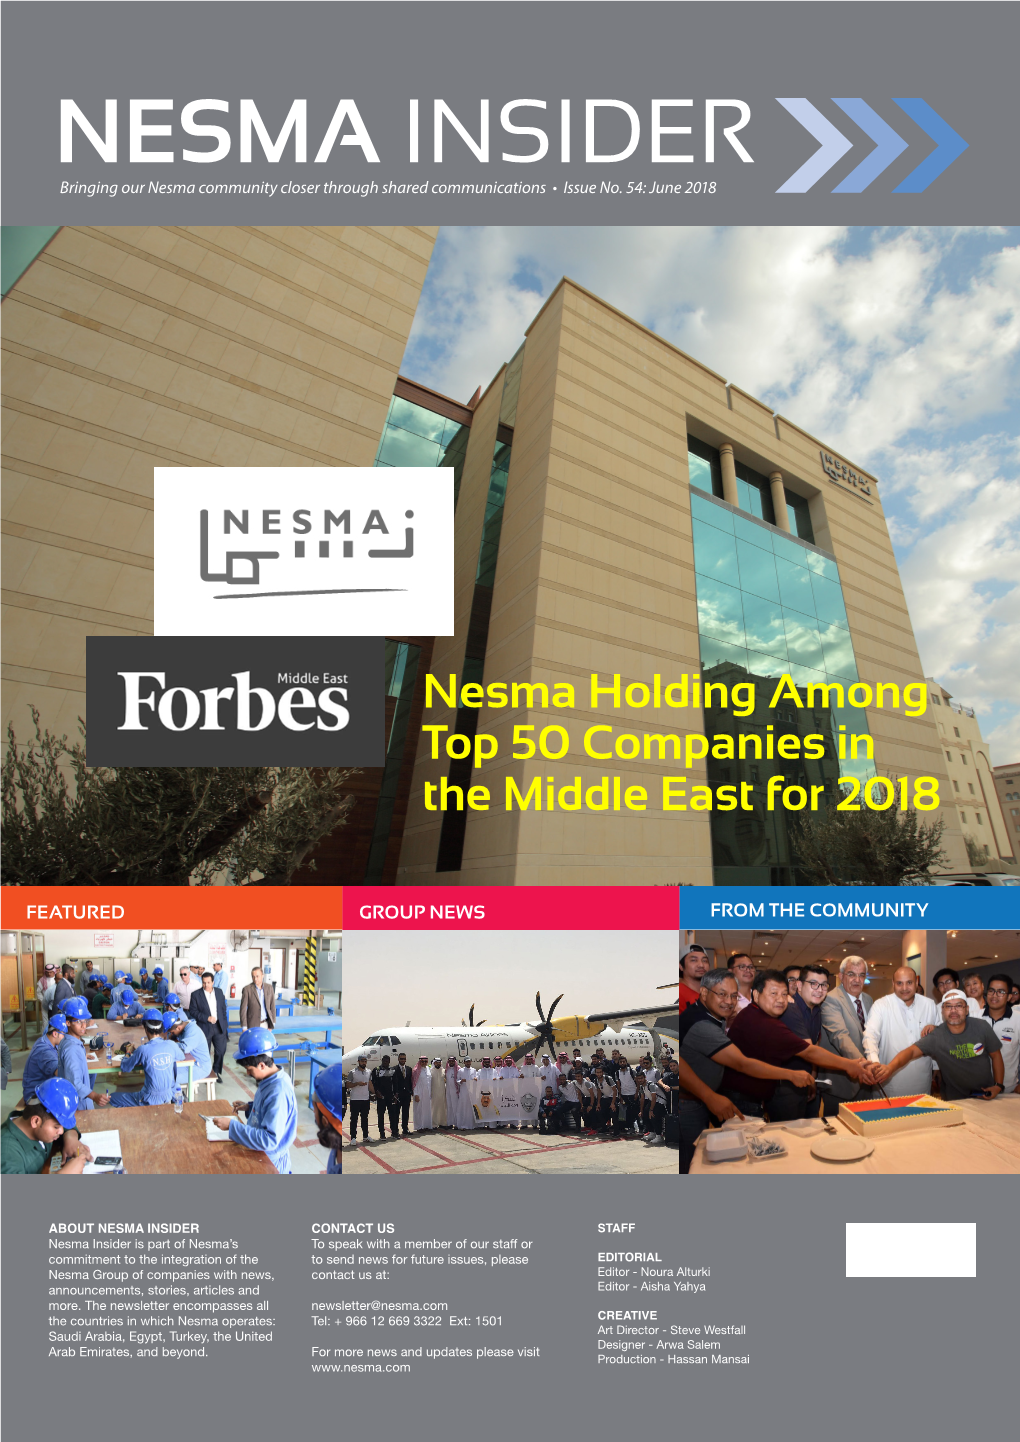 Nesma Holding Among Top 50 Companies in the Middle East for 2018